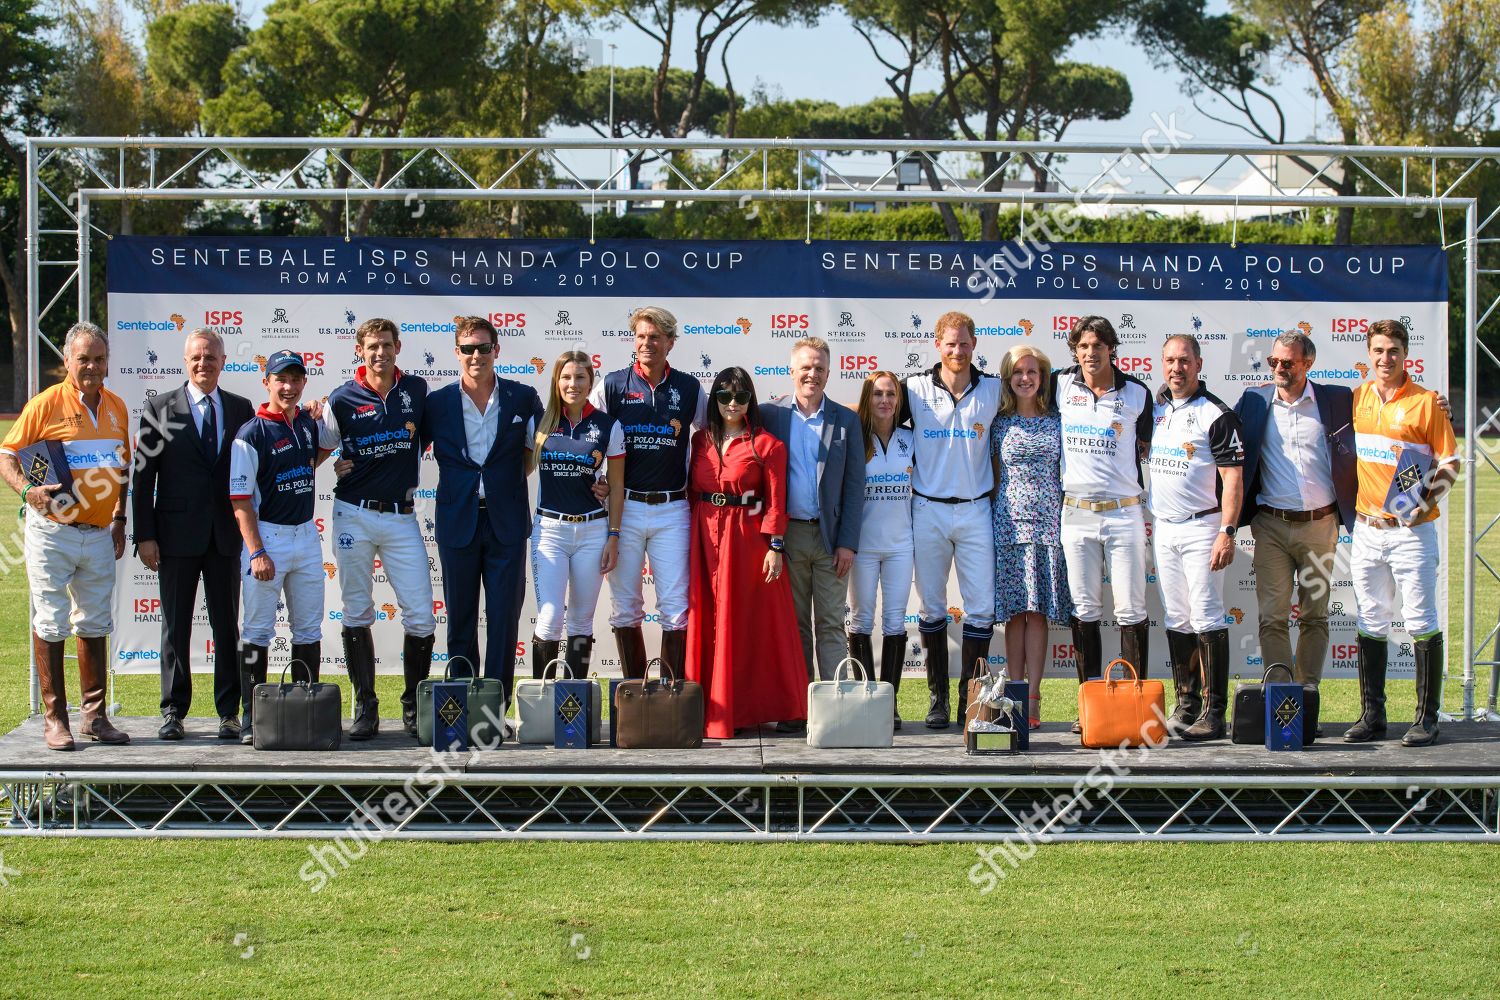 sentebale-isps-handa-polo-cup-at-the-roma-polo-club-rome-italy-shutterstock-editorial-10247325be.jpg